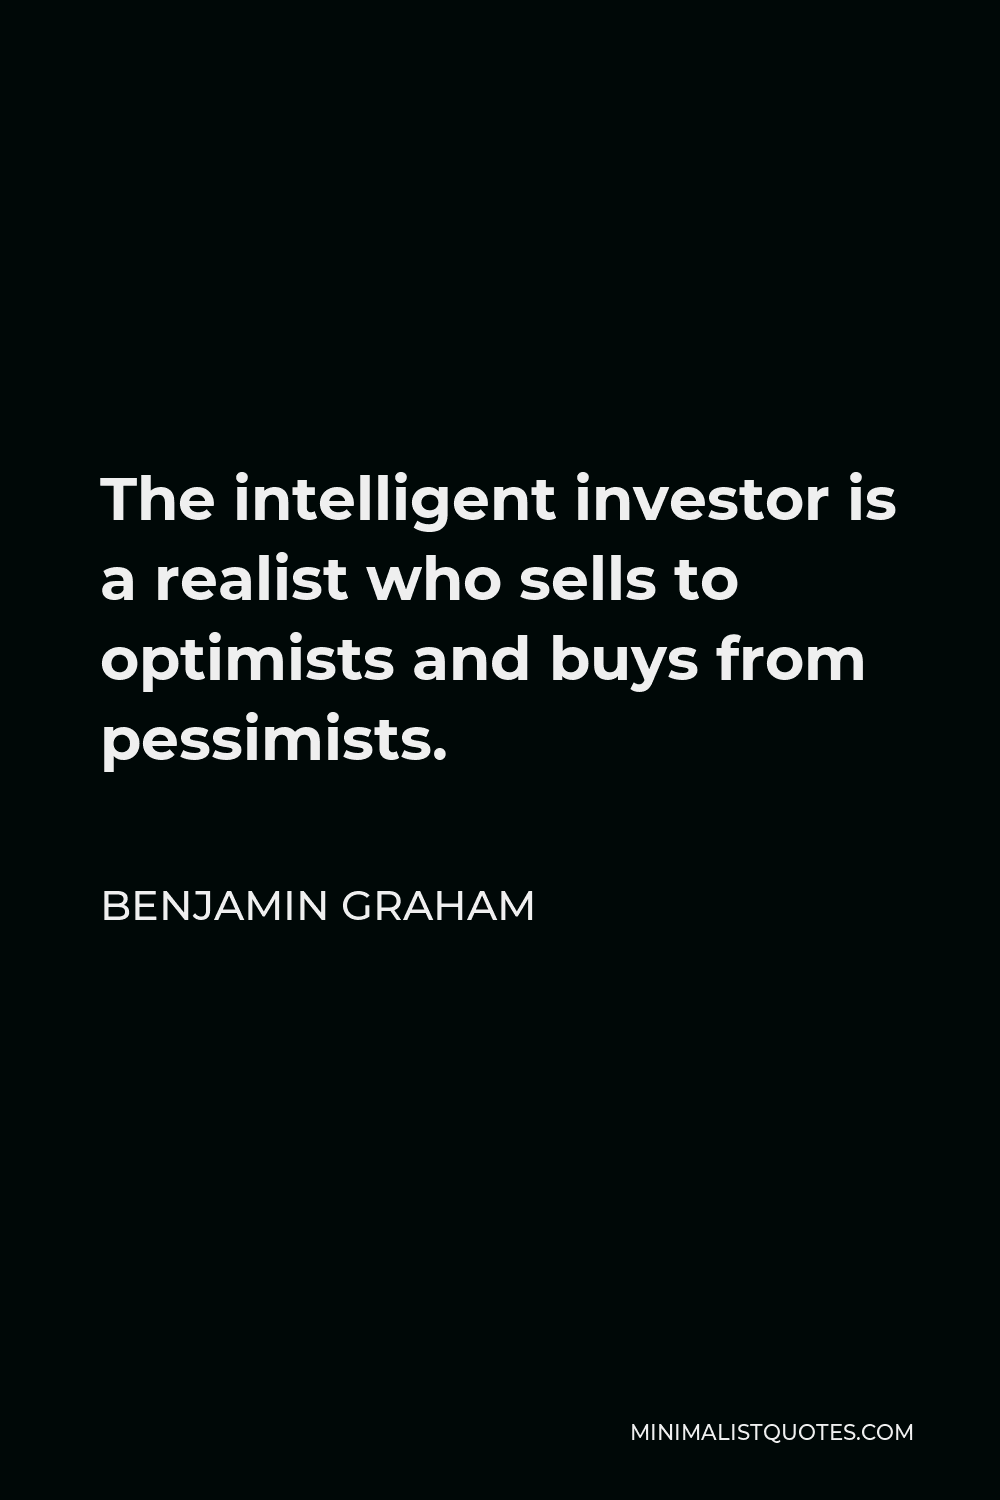 Benjamin Graham Quote - The intelligent investor is a realist who sells to optimists and buys from pessimists.